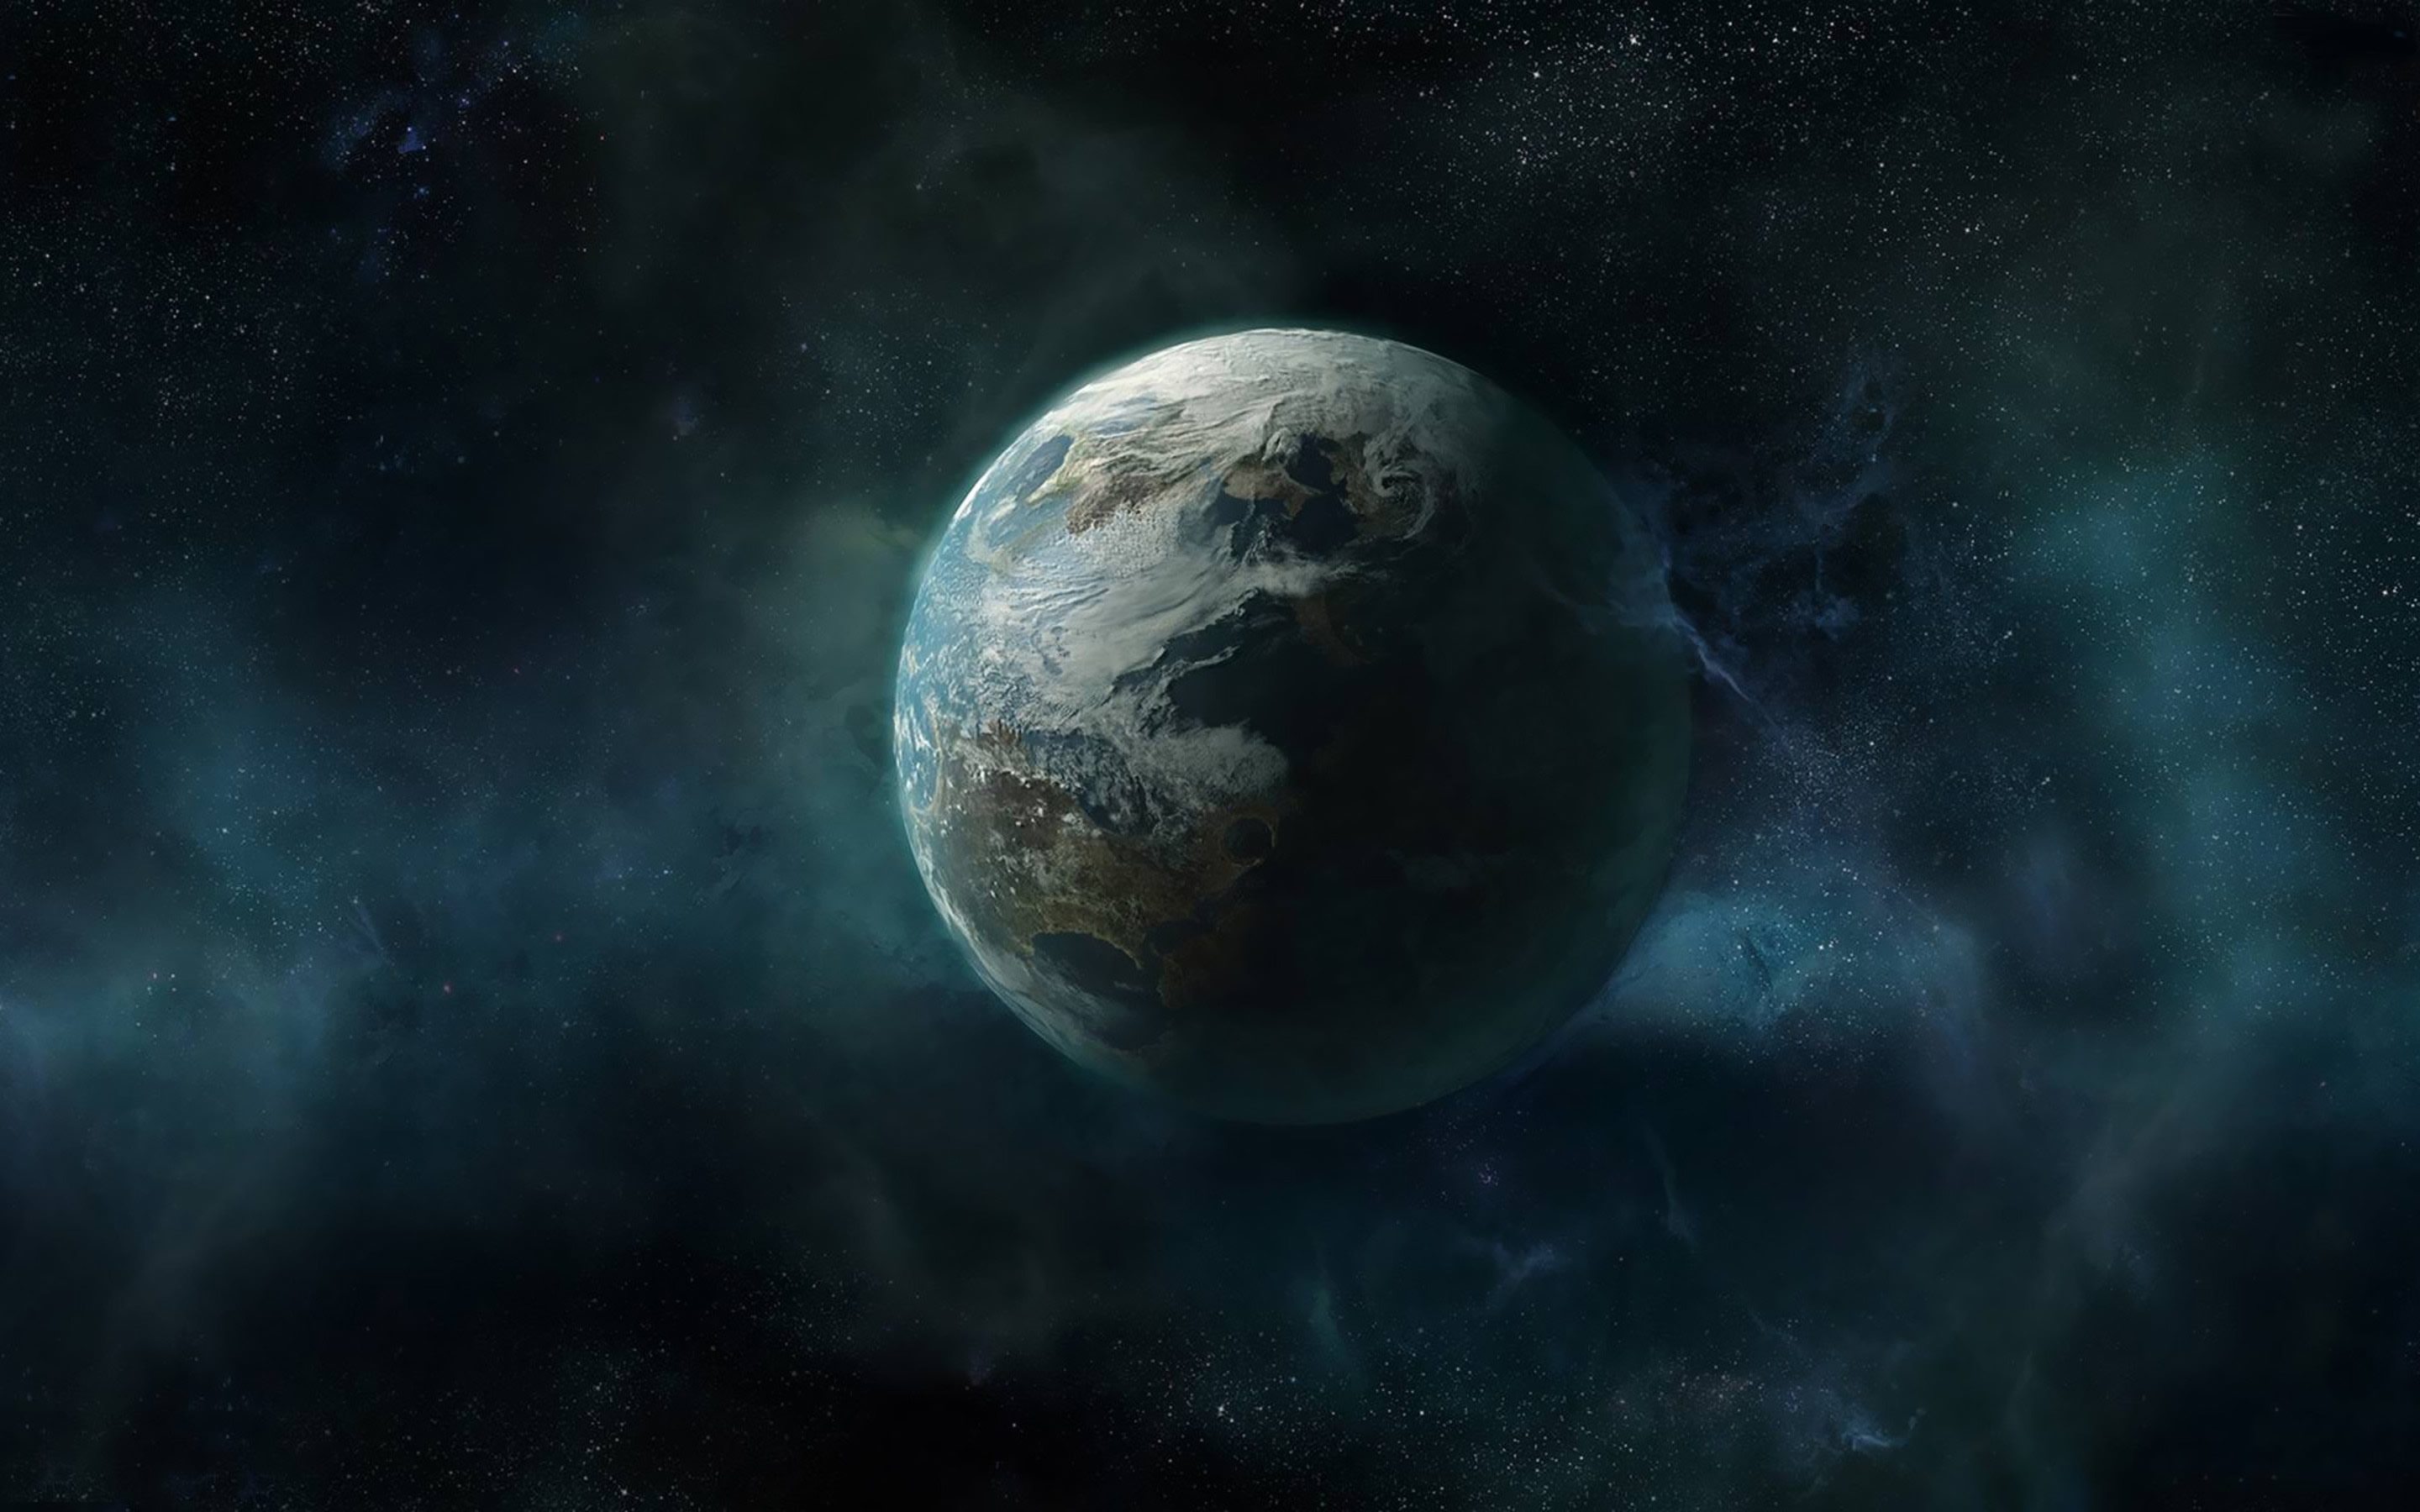 macbook pro retina wallpaper 2880x1800,outer space,planet,atmosphere,astronomical object,space